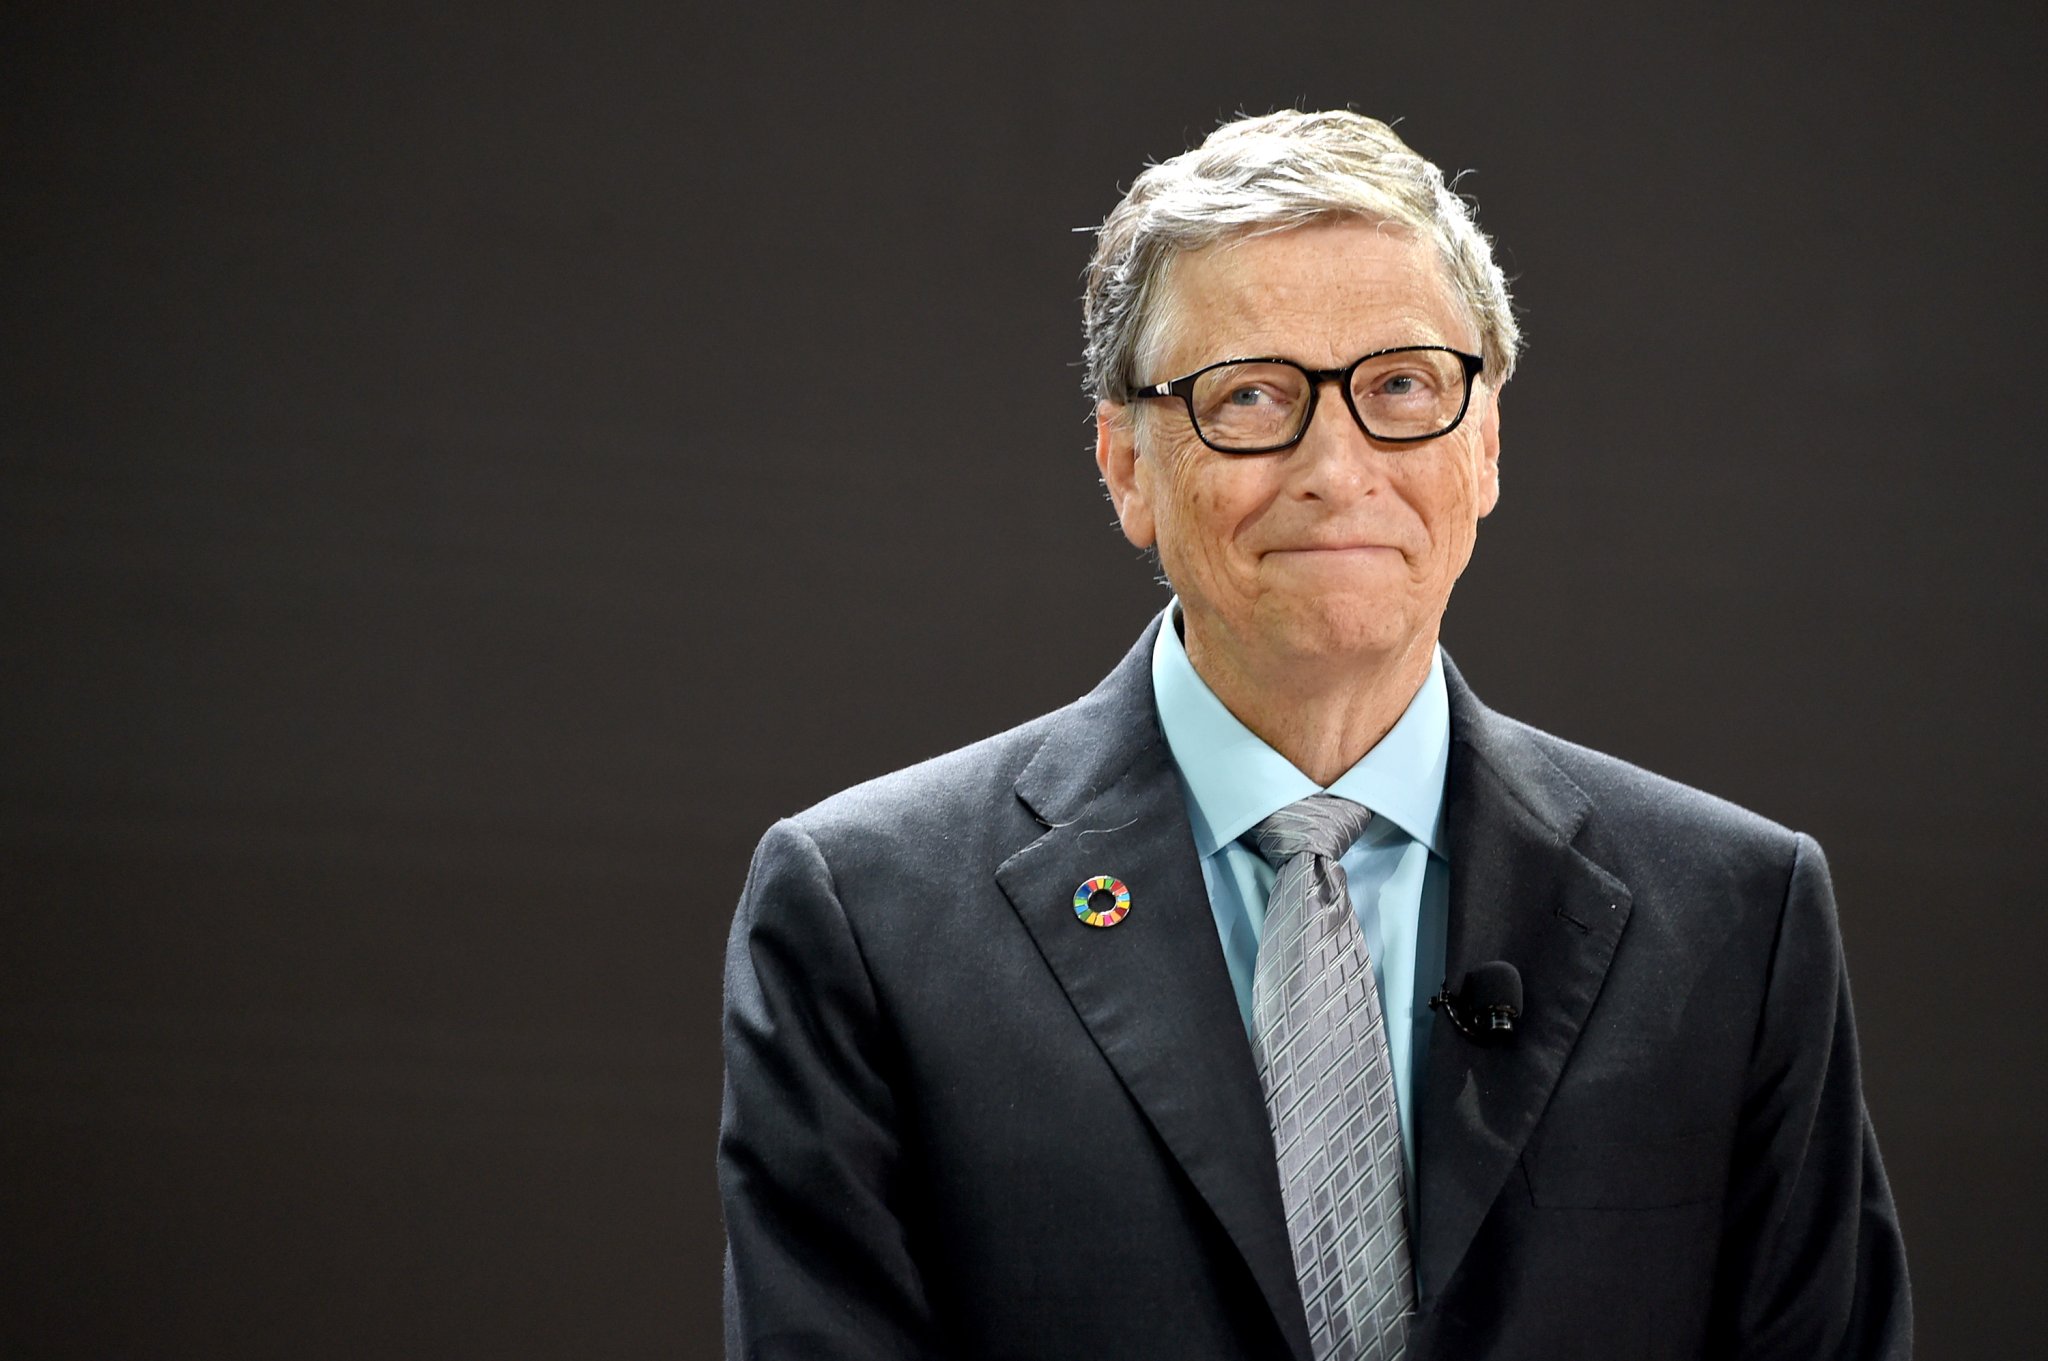 Married Bill Gates Would Frequently Shoot His Shot At Women At Work While At Microsoft According To Report